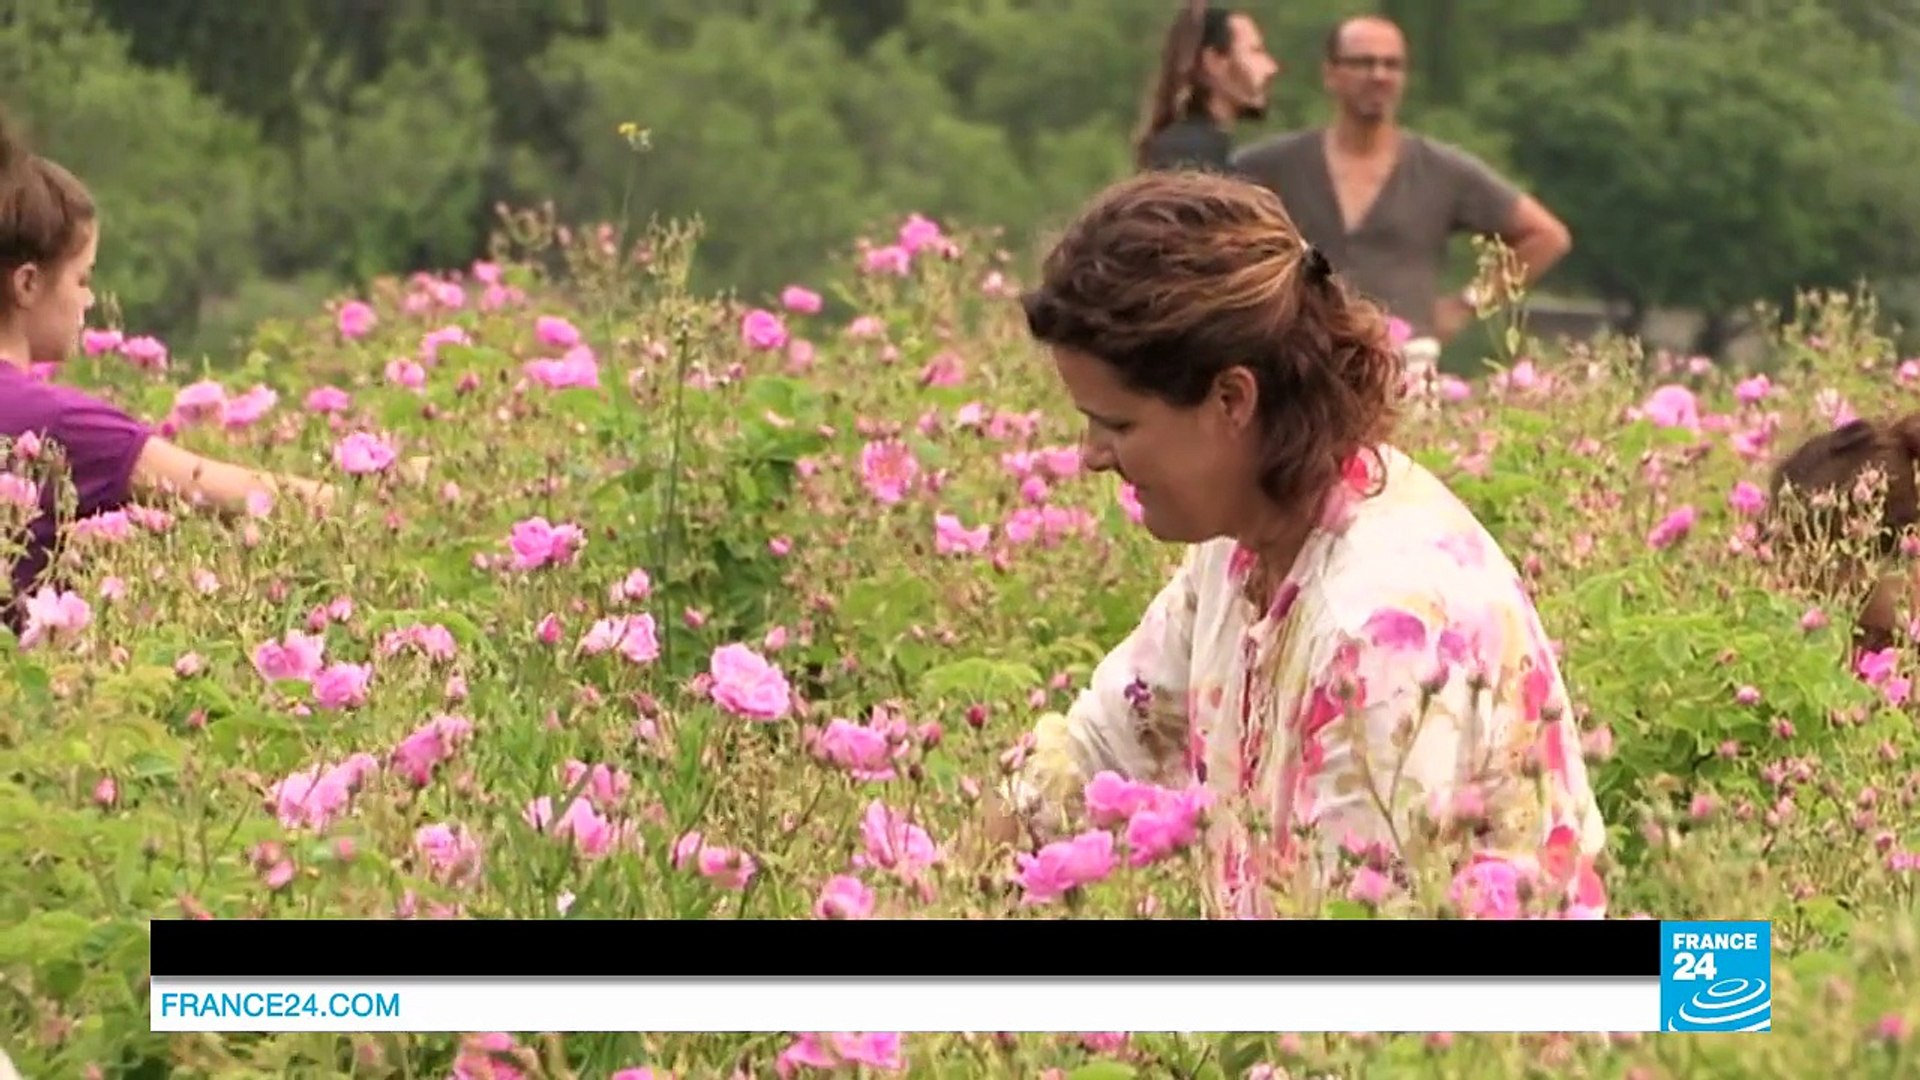 France's perfume capital: The flower fields of Grasse - video